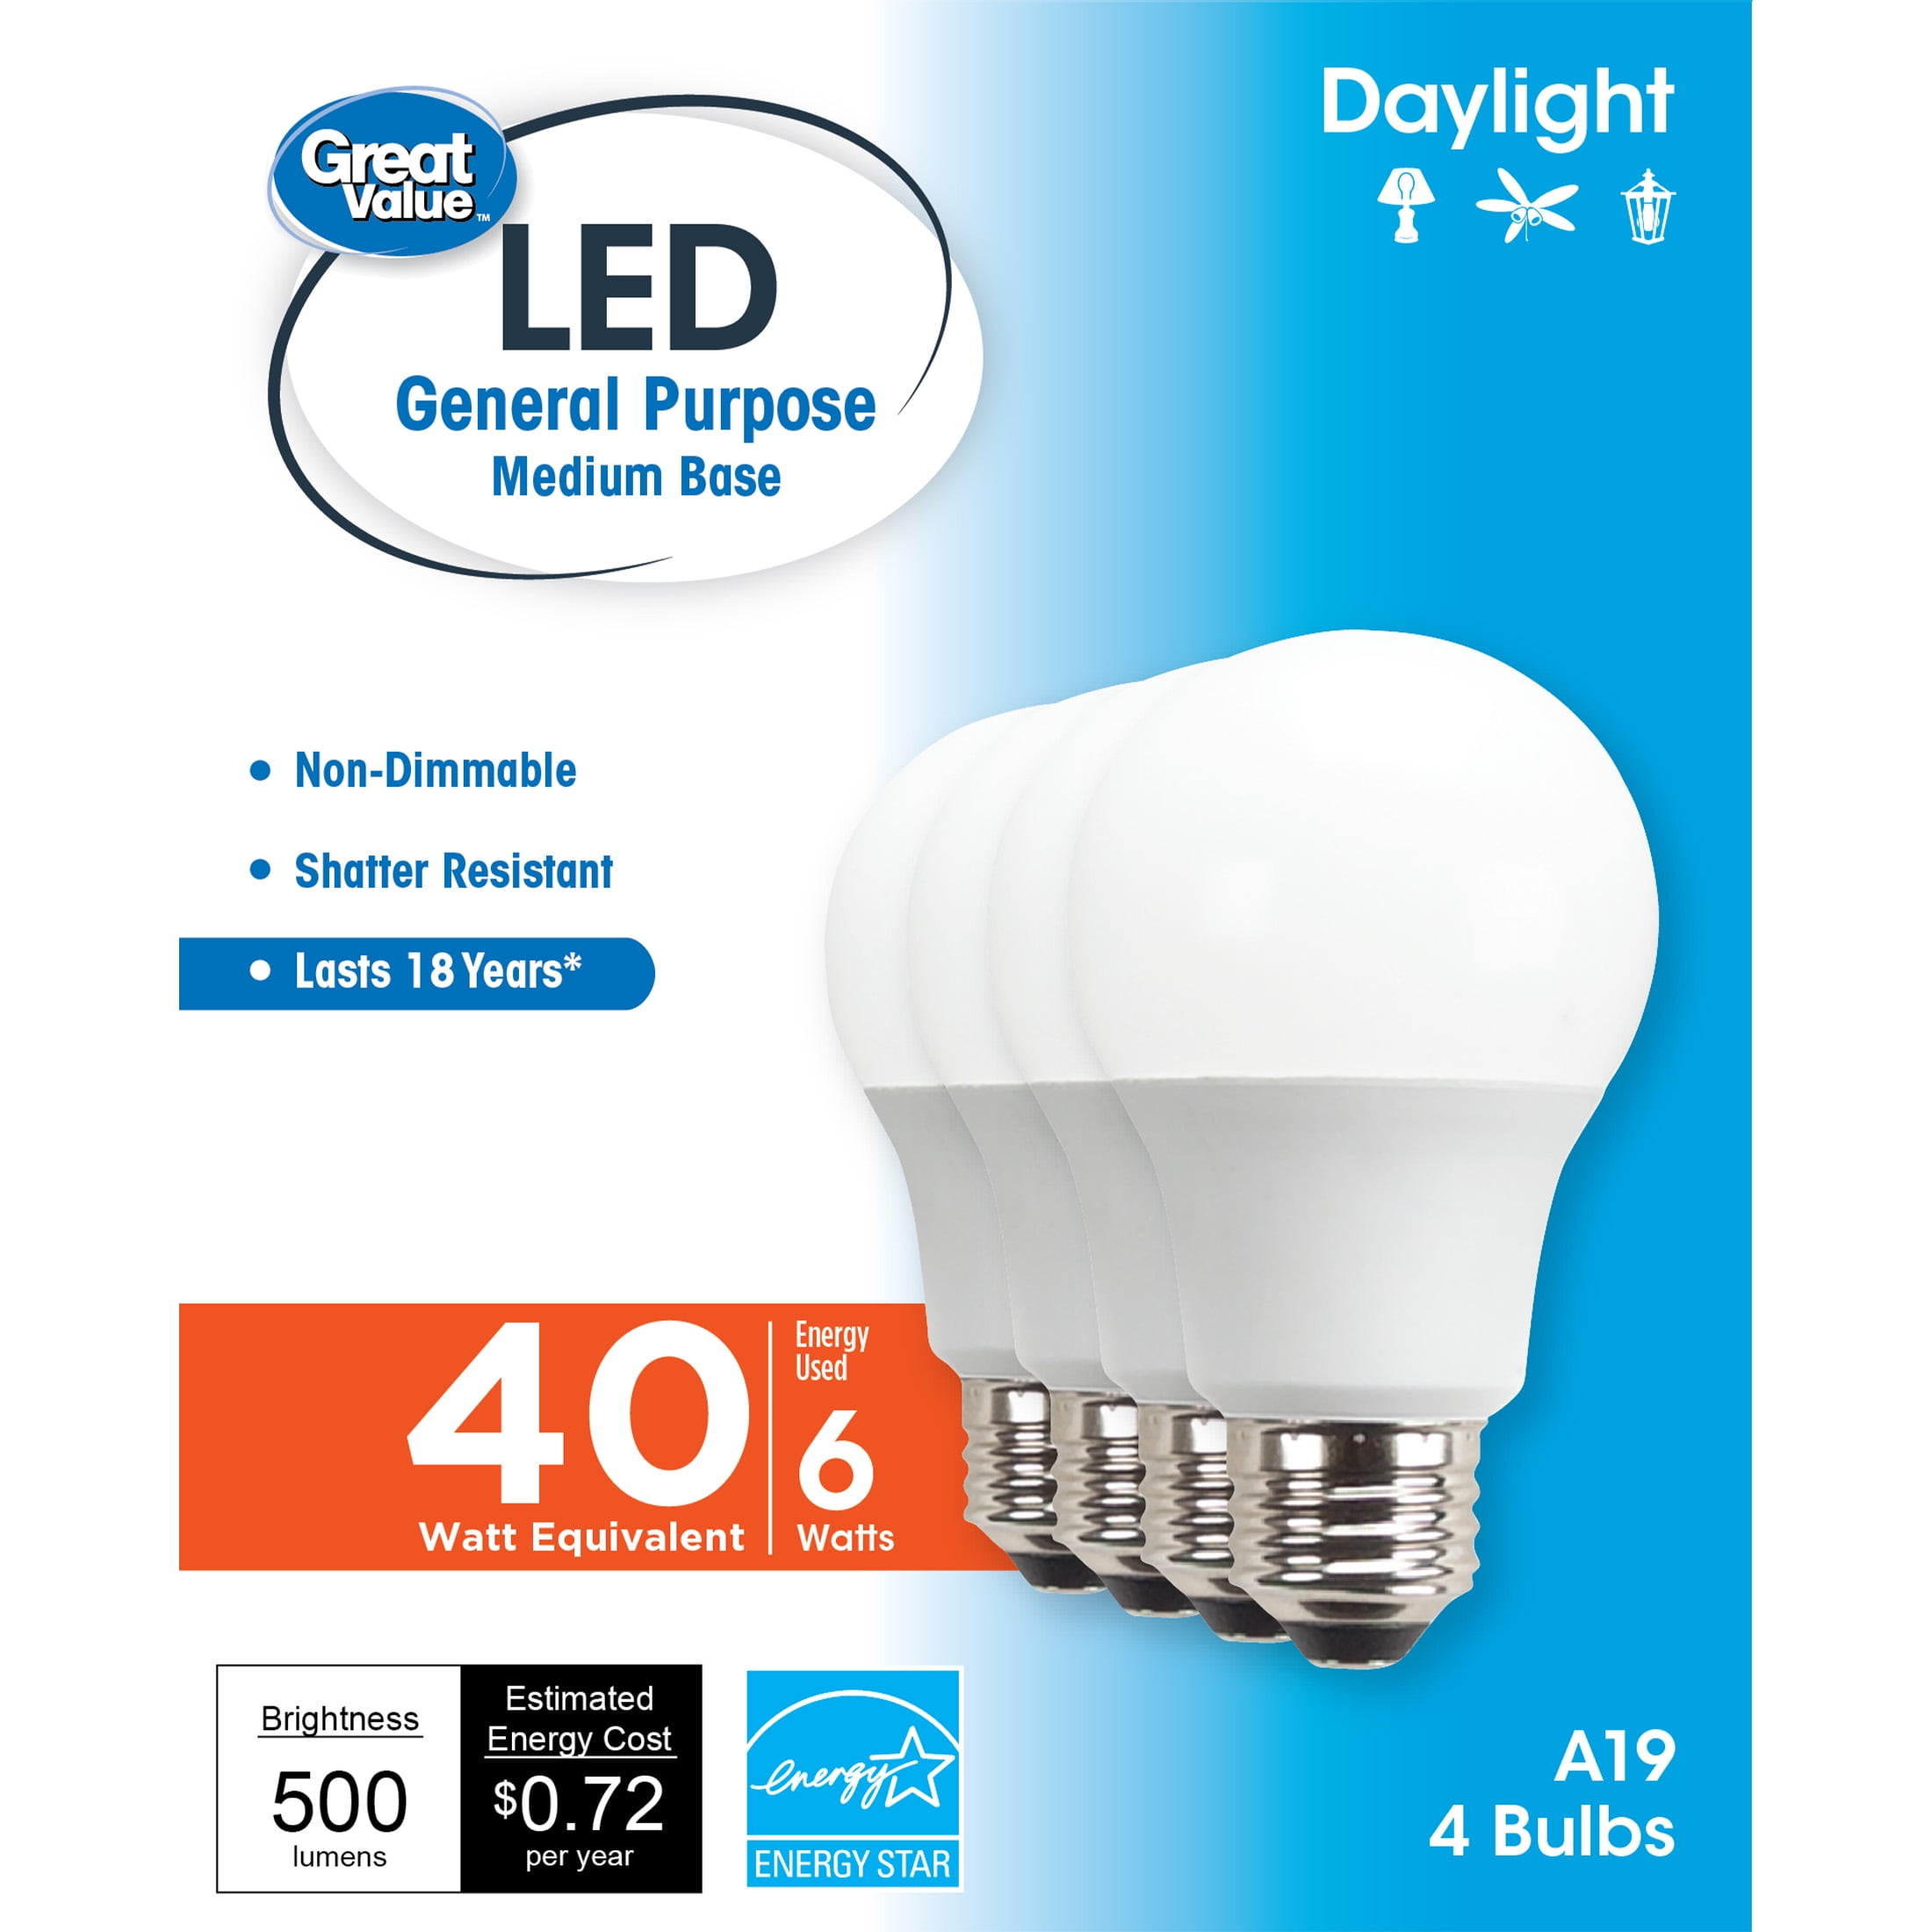 Great Value LED Light Bulb, 6W (40w Equivalent) A19 General Purpose Lamp E26 Medium Base, Non-Dimmable, Daylight, 4-Pack, White